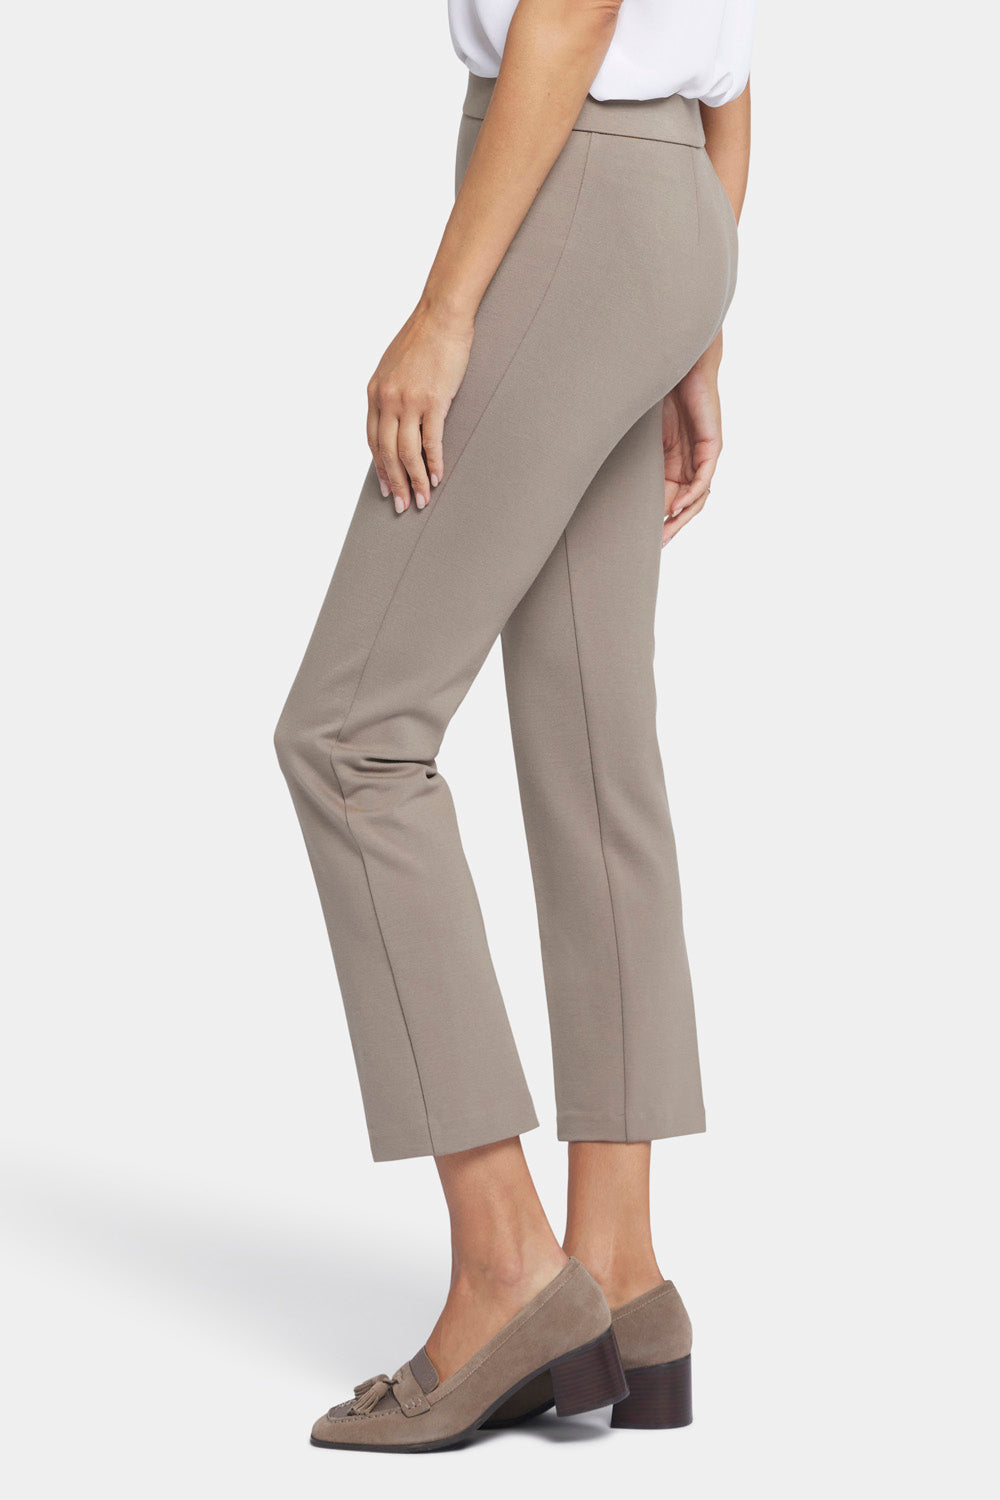 NYDJ Pull-On Straight Ankle Trouser Pants Sculpt-Her™ Collection - Saddlewood